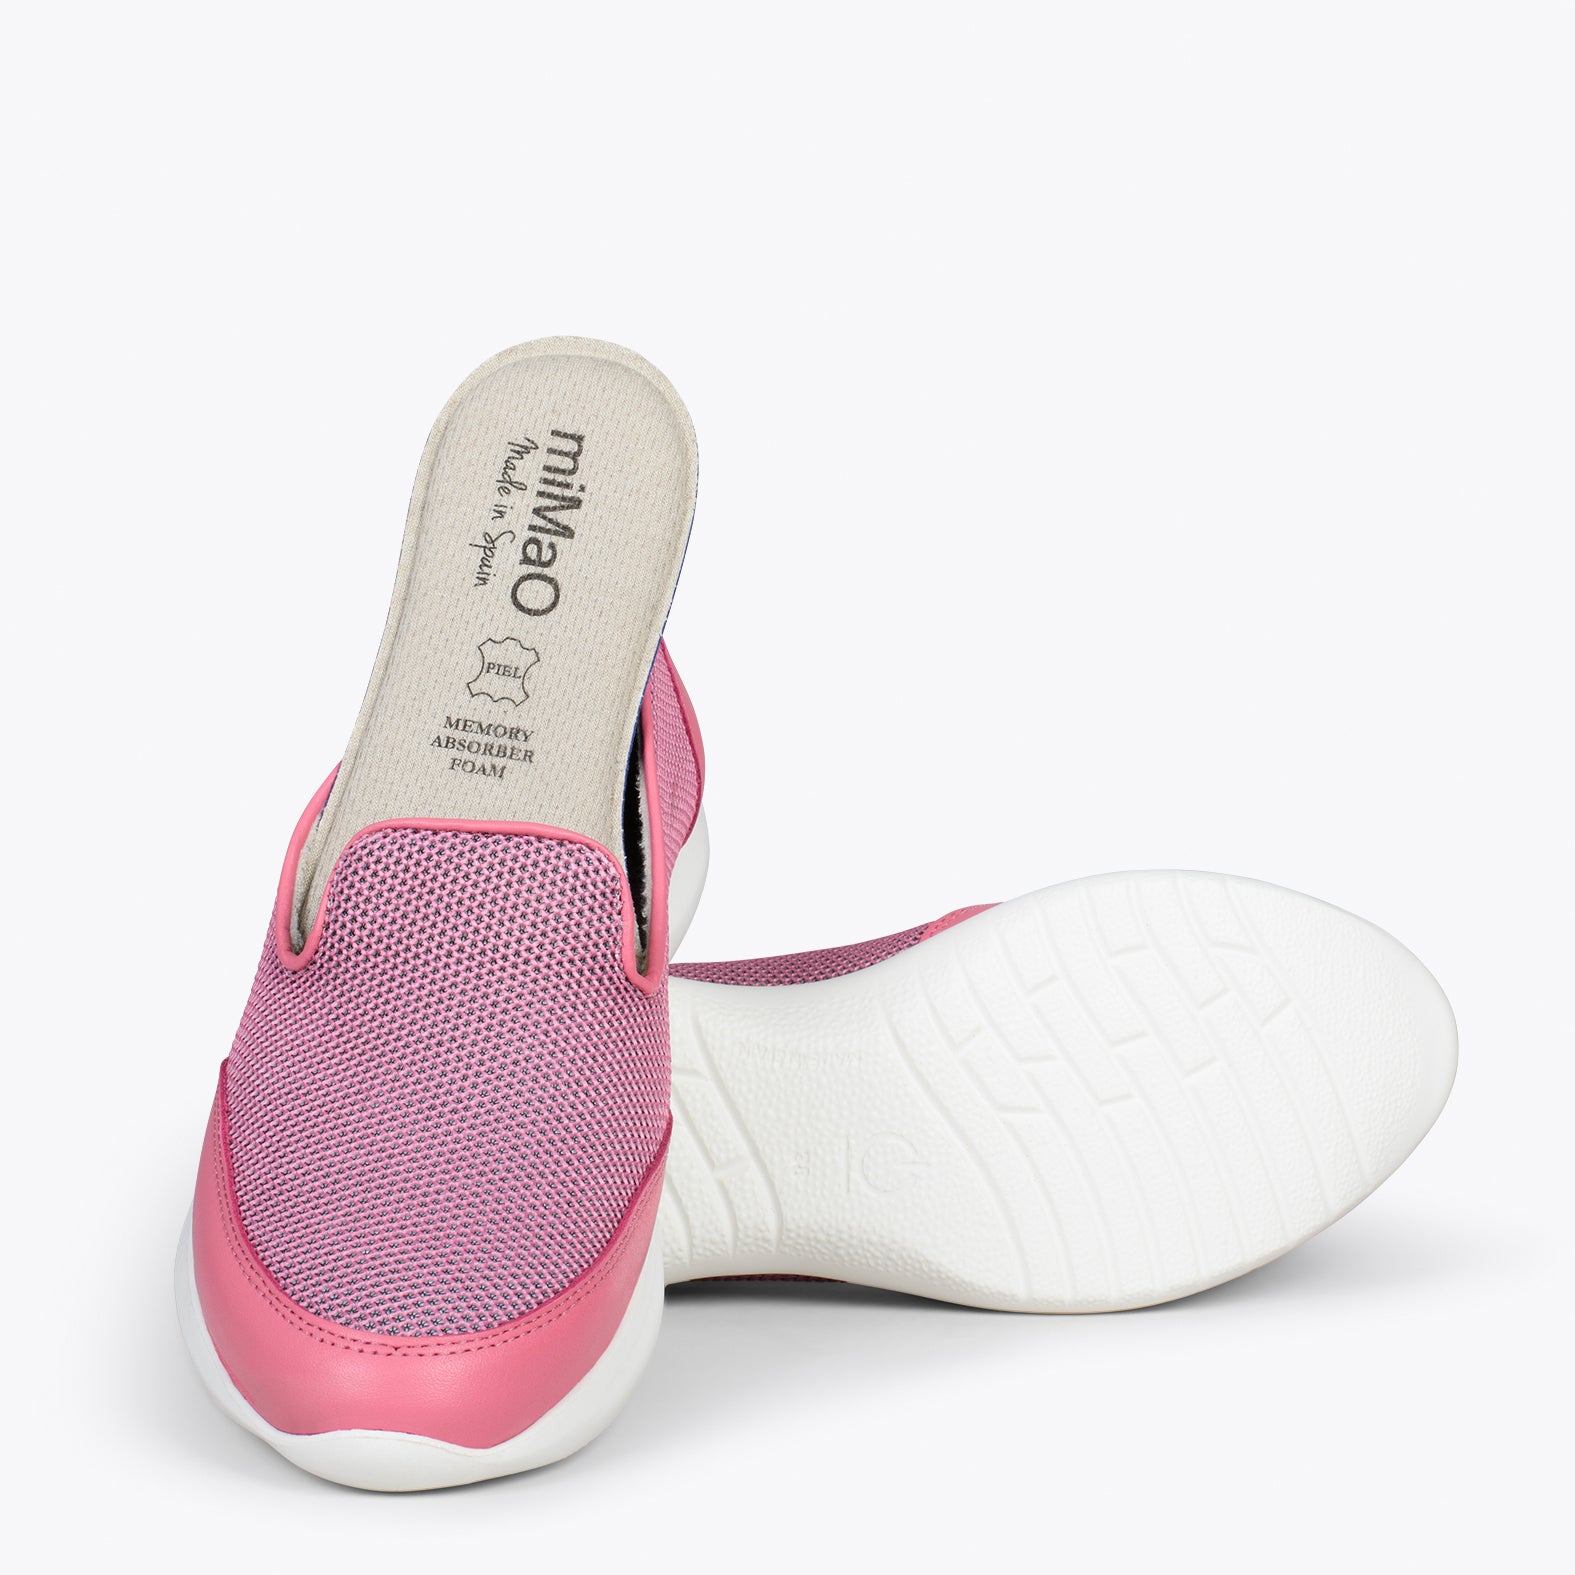 SLIPPER SPORT – PINK sneakers with no laces and mesh design